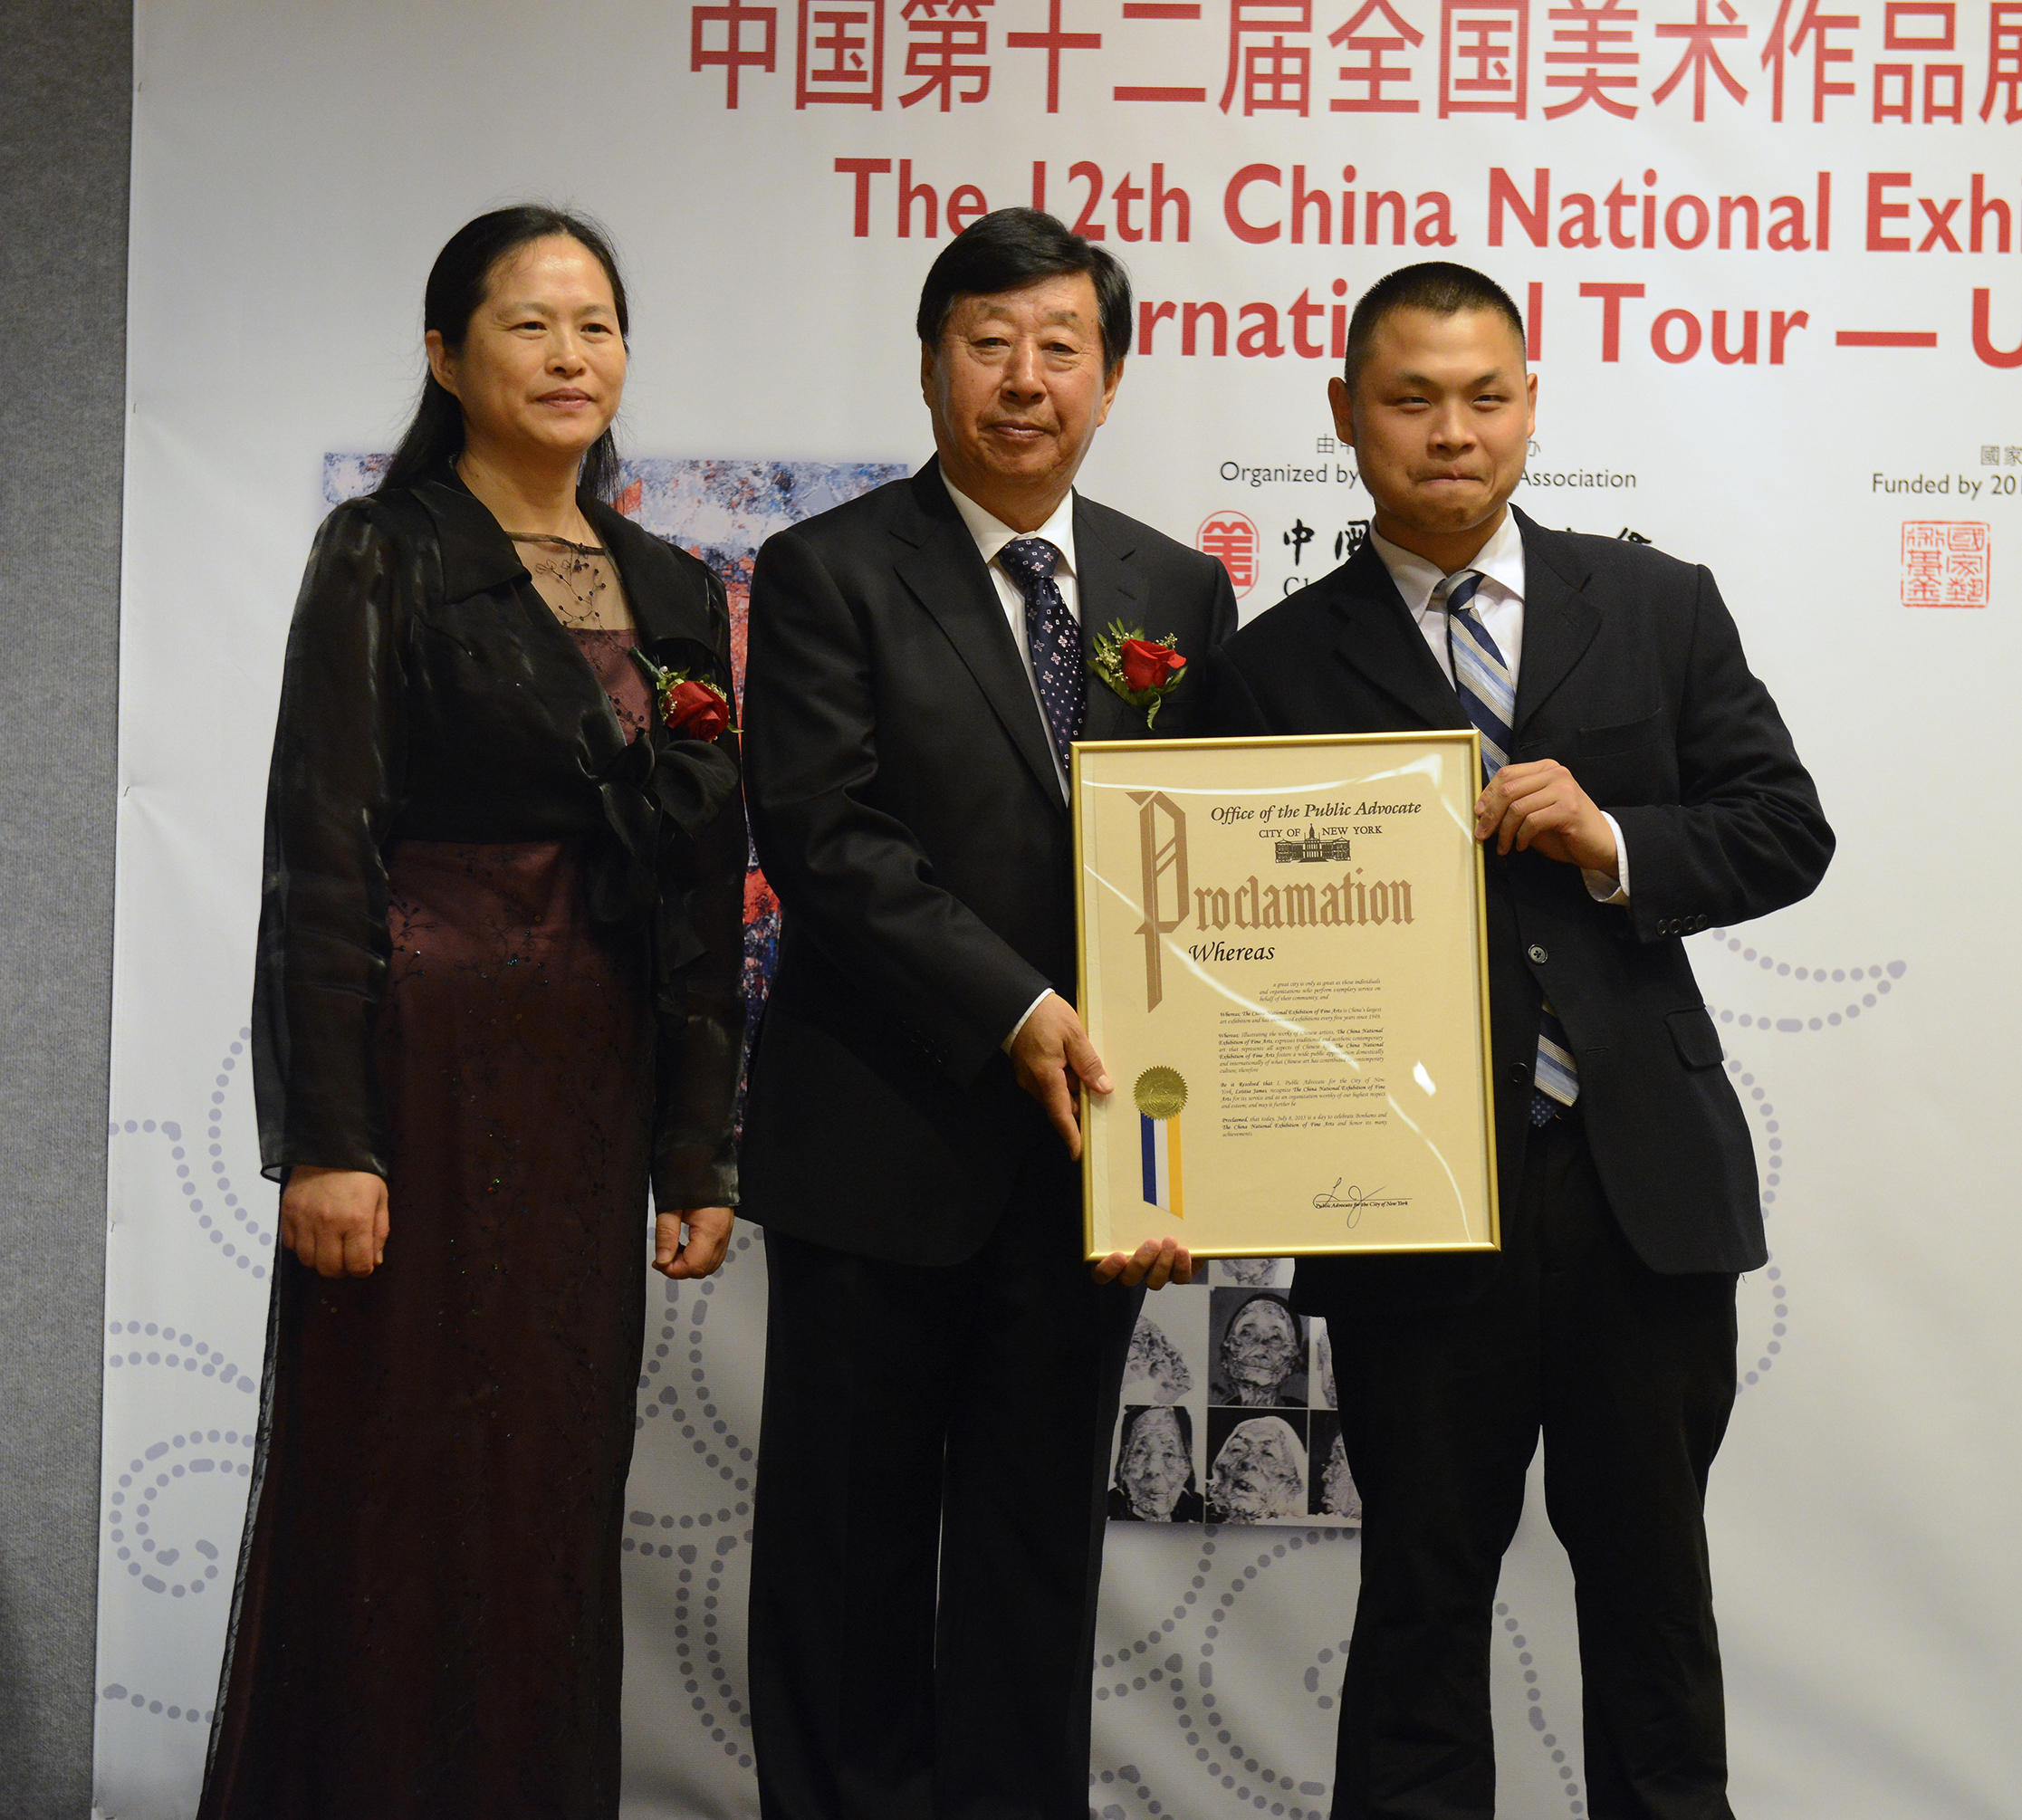 Office of NYC Public Advocate Presents Proclamation  to12th China National Exhibition of Fine Arts